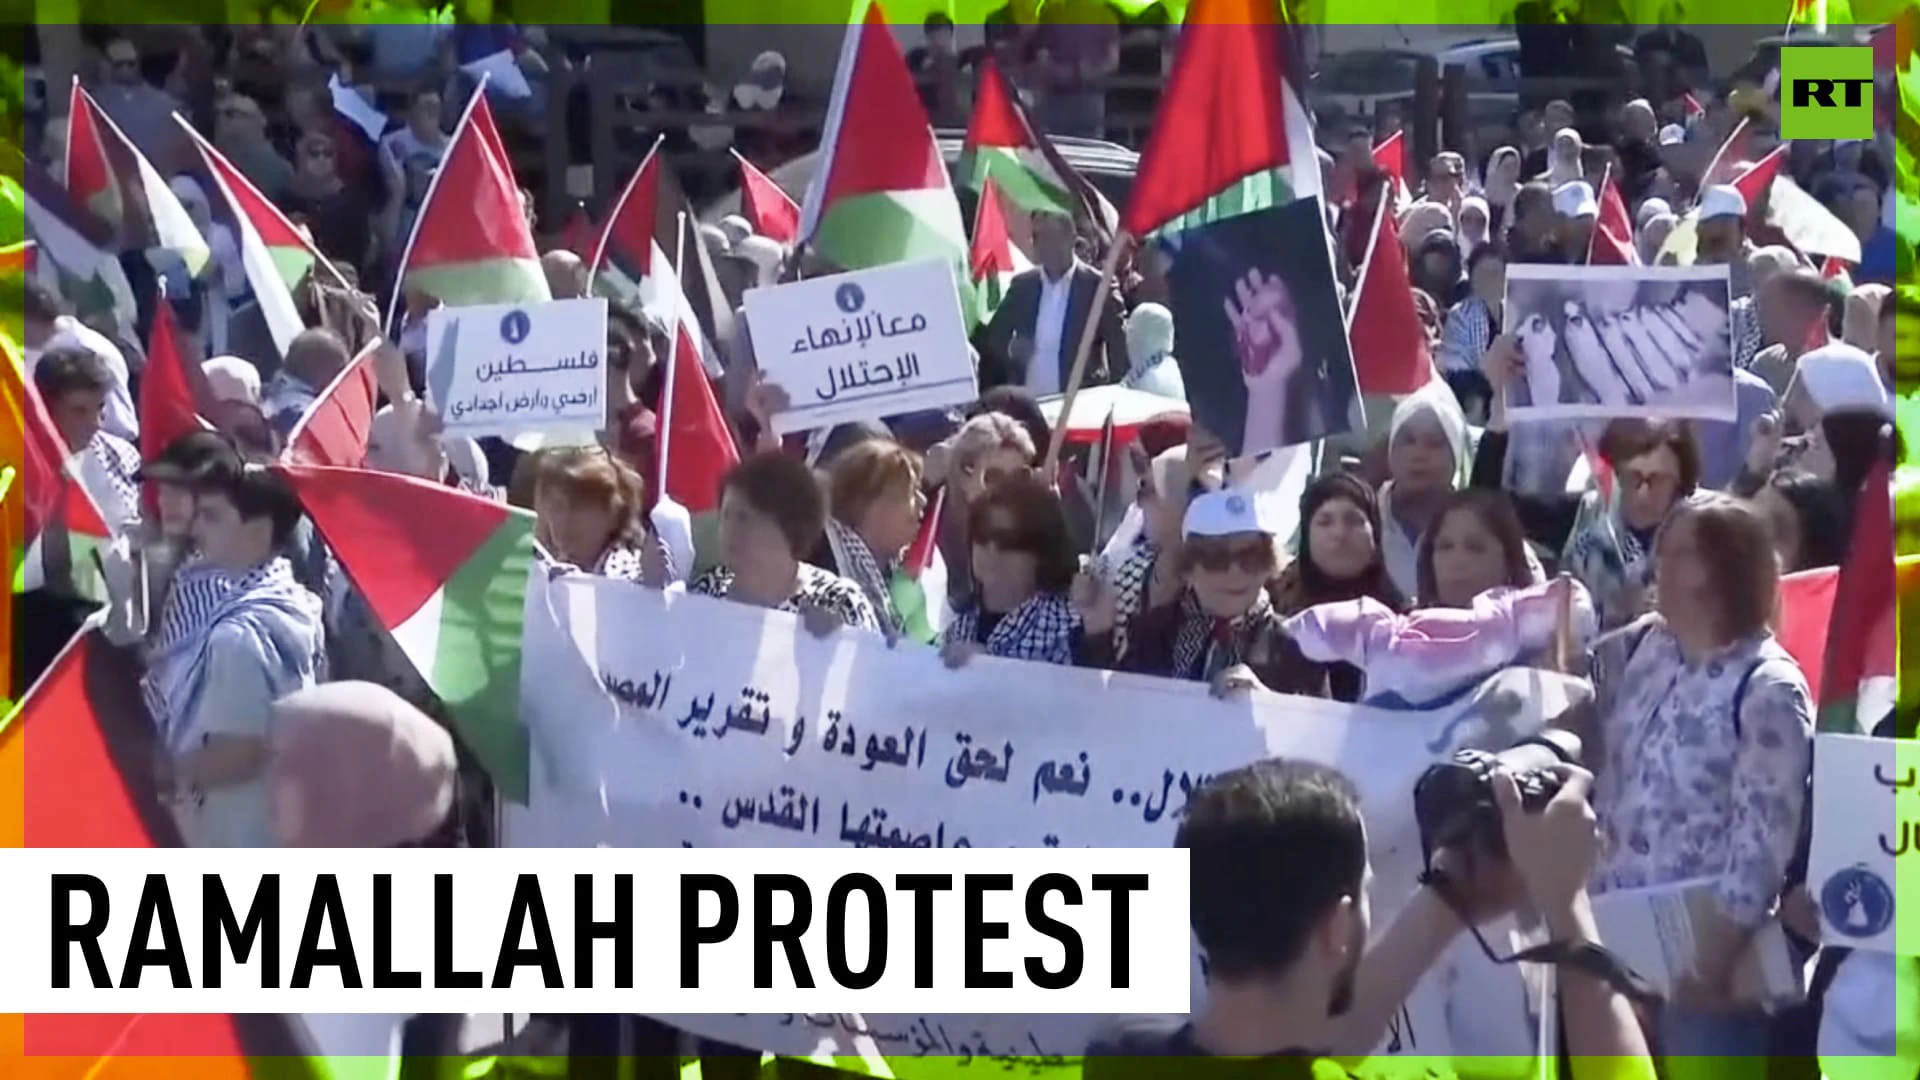 West Bank rallies in support of Gaza